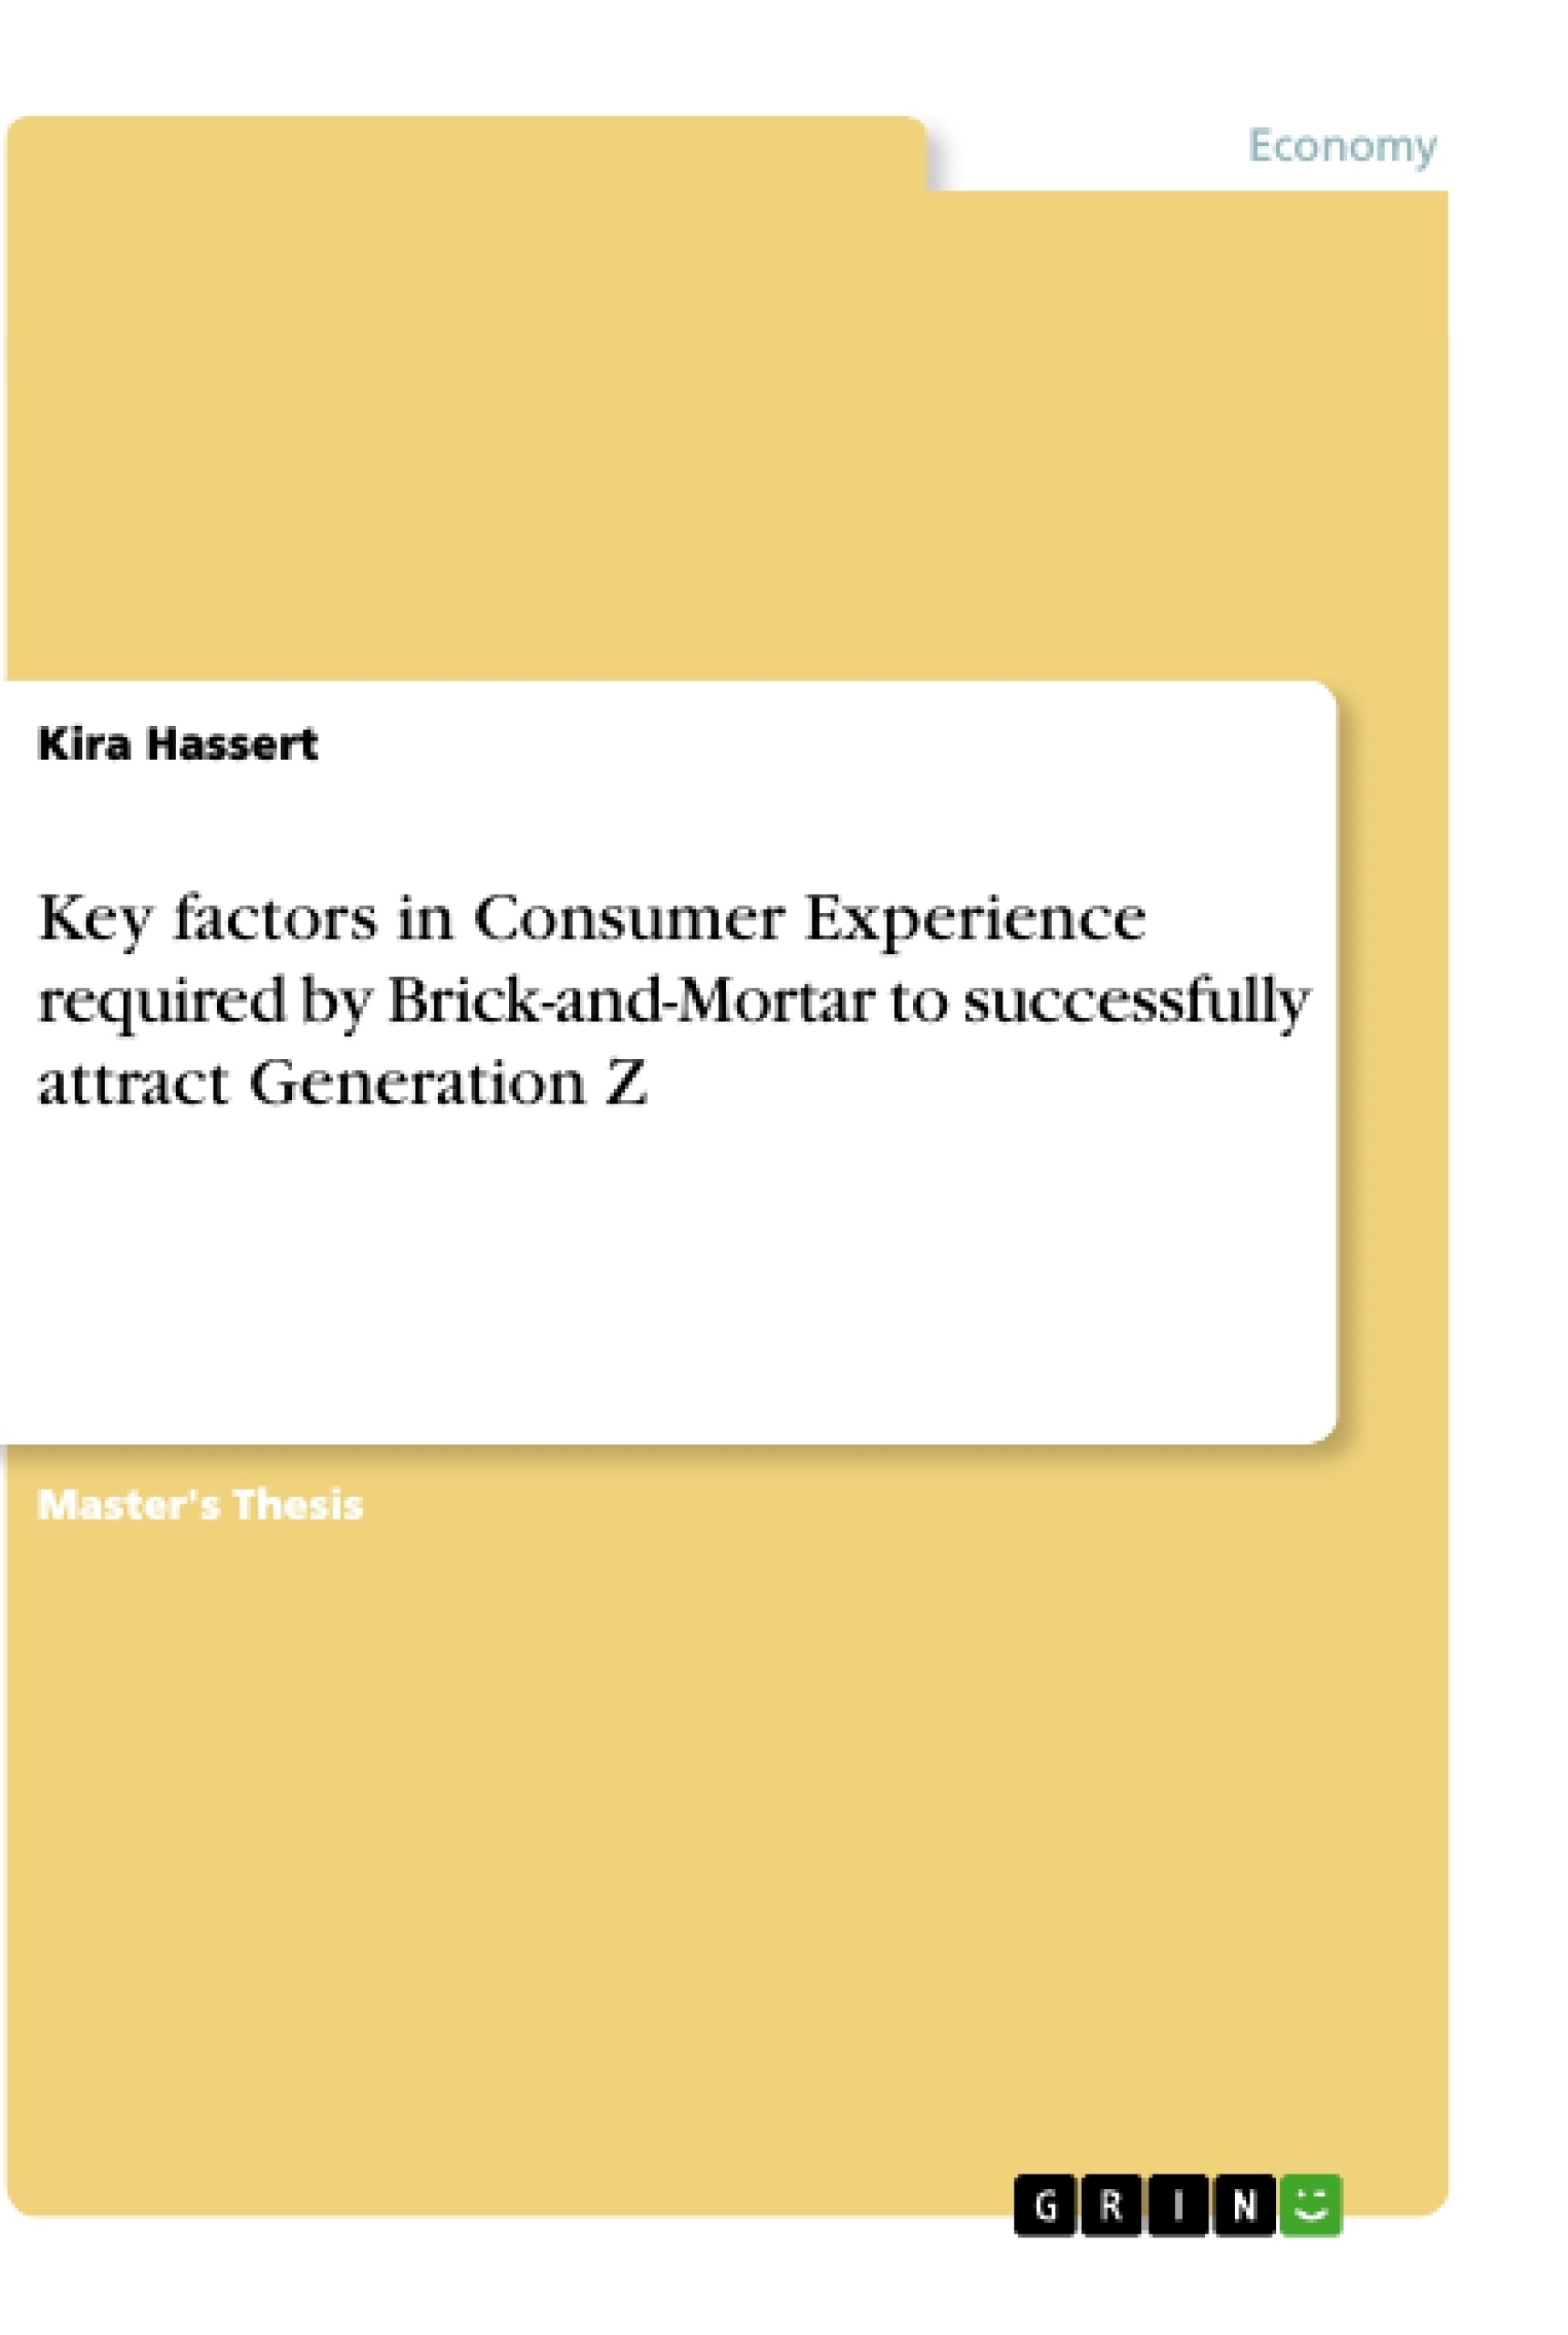 Titre: Key factors in Consumer Experience required by Brick-and-Mortar to successfully attract Generation Z